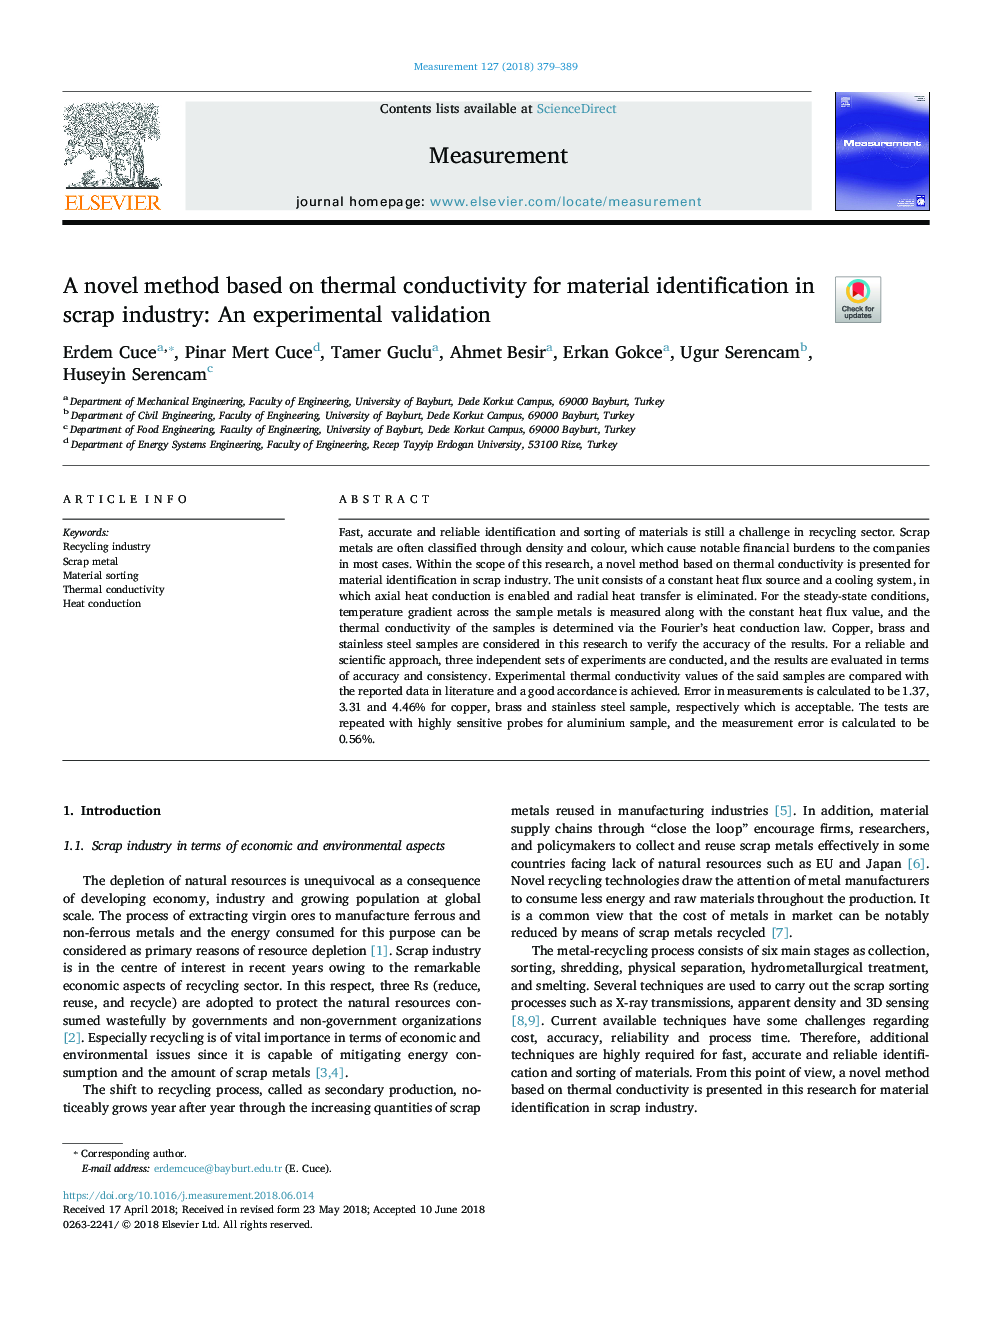 A novel method based on thermal conductivity for material identification in scrap industry: An experimental validation